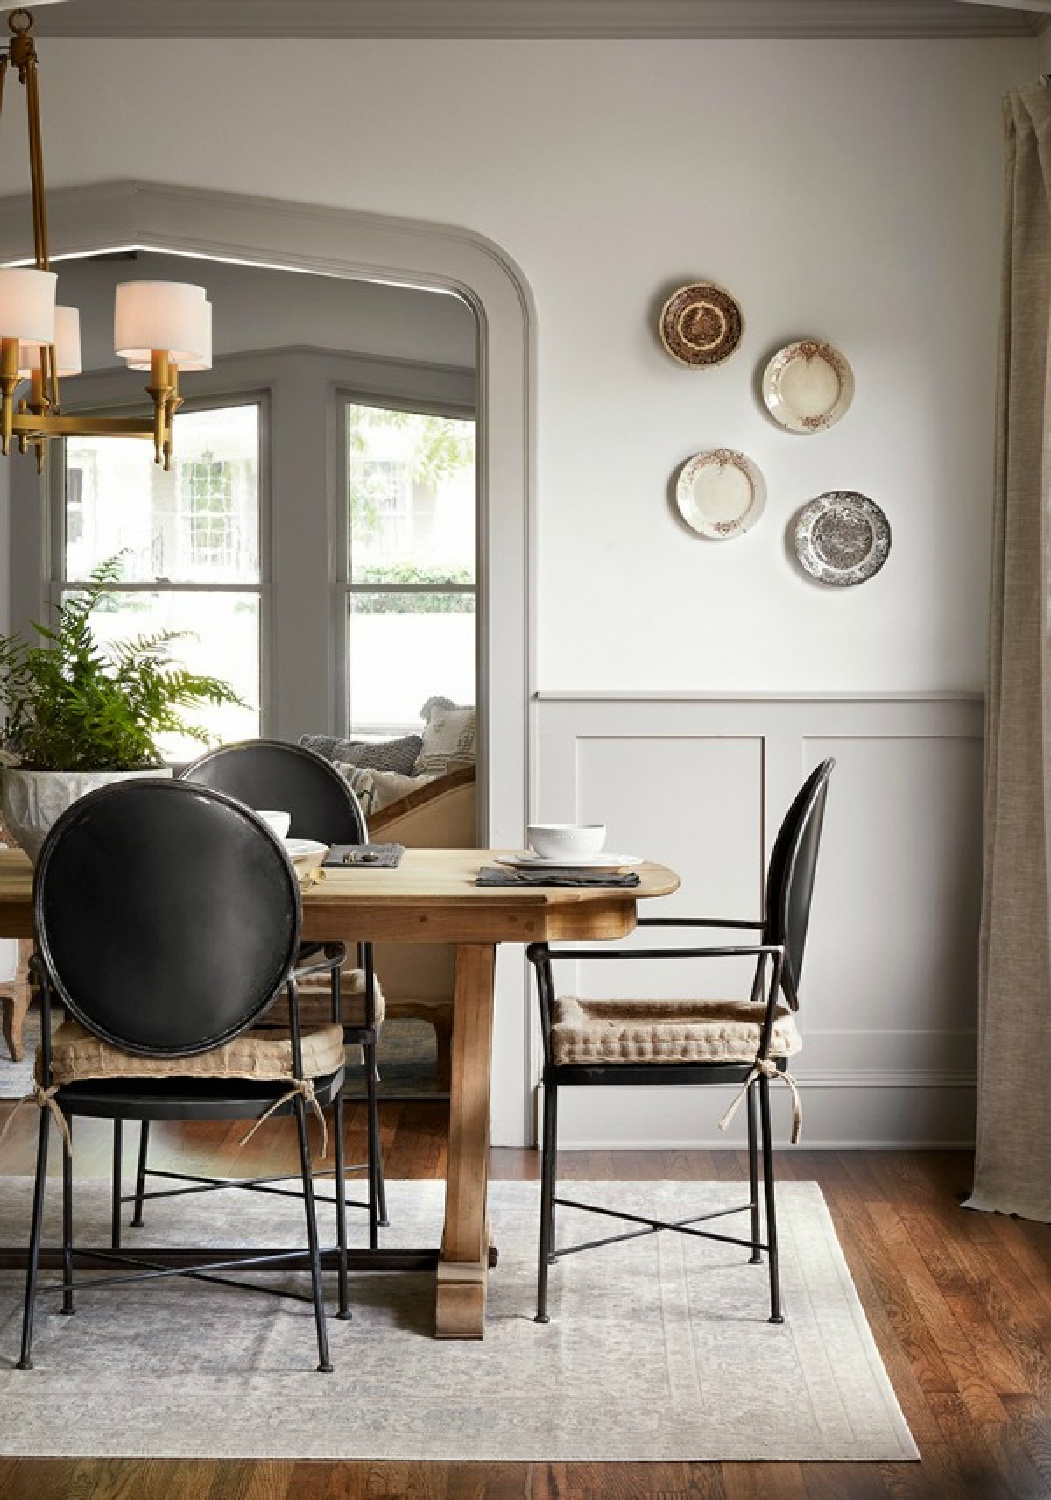 Plates on dining room wall. Come get inspired by Tranquil and Timeless Tudor Design Details From a Serene 1920s Texas Cottage renovated on HGTV's Fixer Upper by Chip and Joanna and known as the Scrivano House. #fixerupper #scrivano #cottagestyle #interiordesign #greytrim #serenedecor